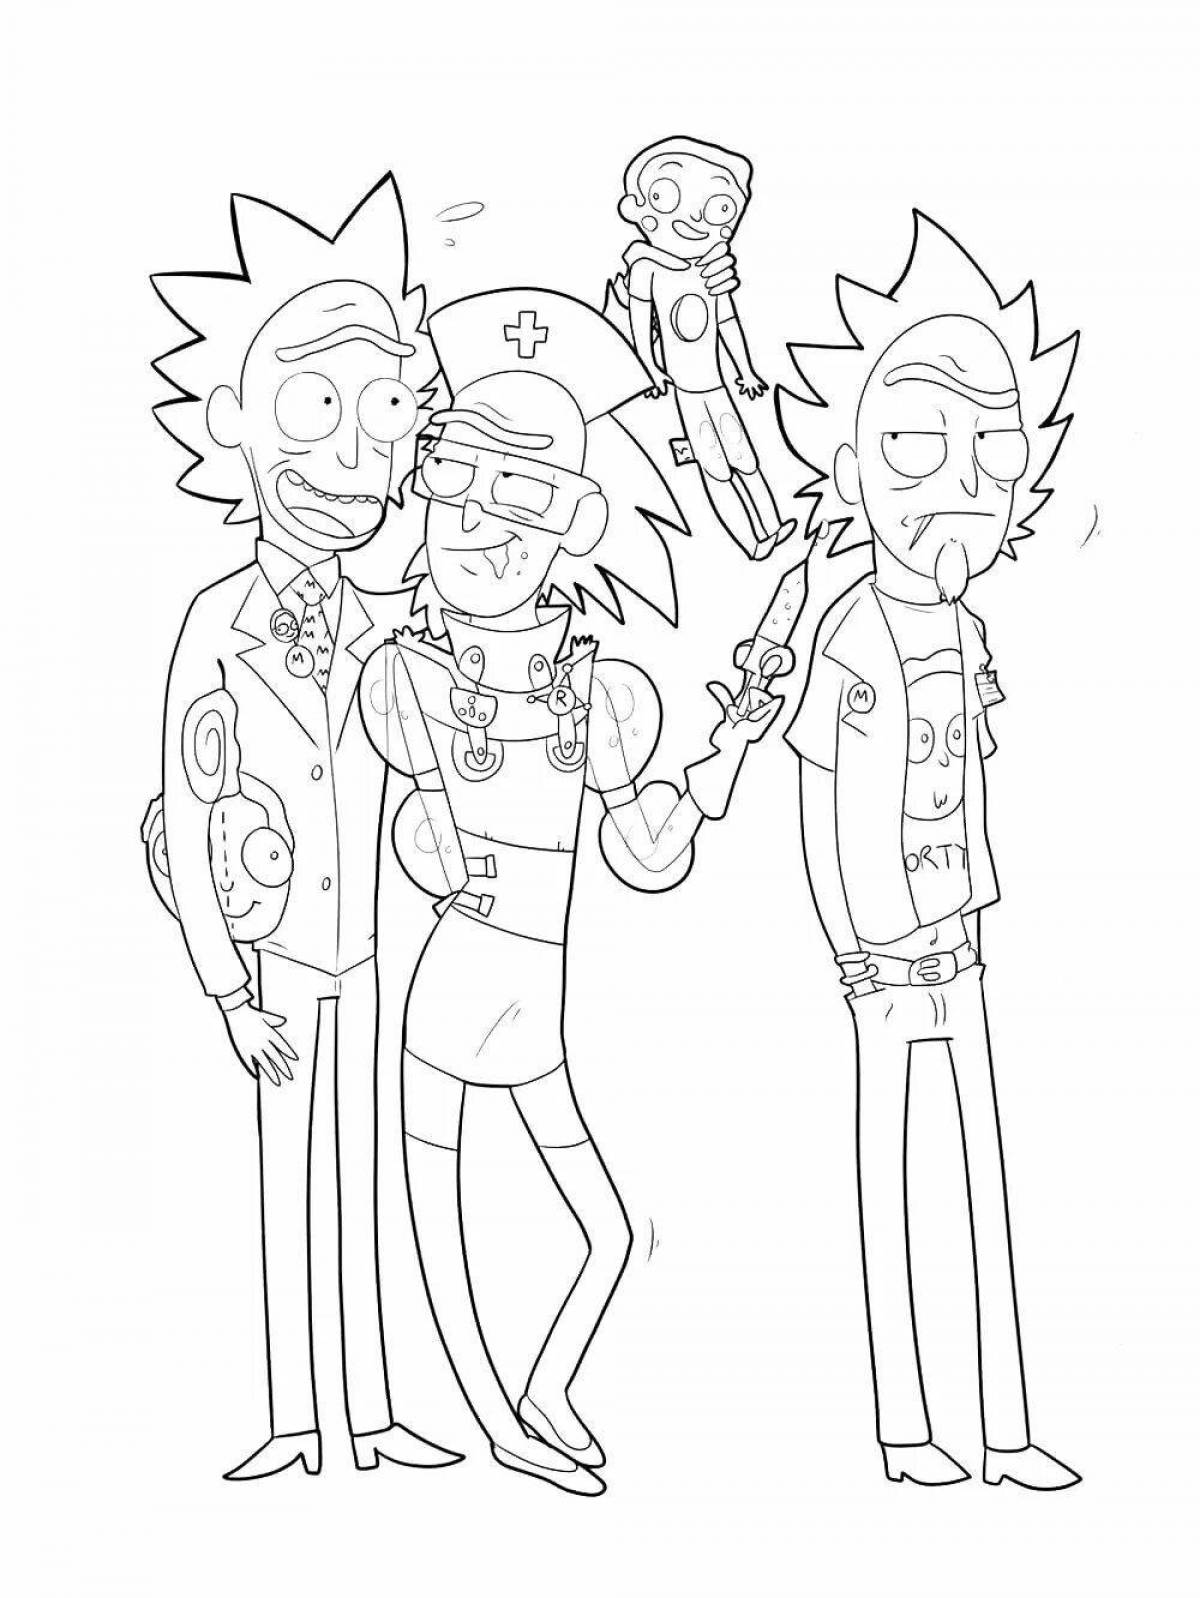 Exquisite morty coloring book